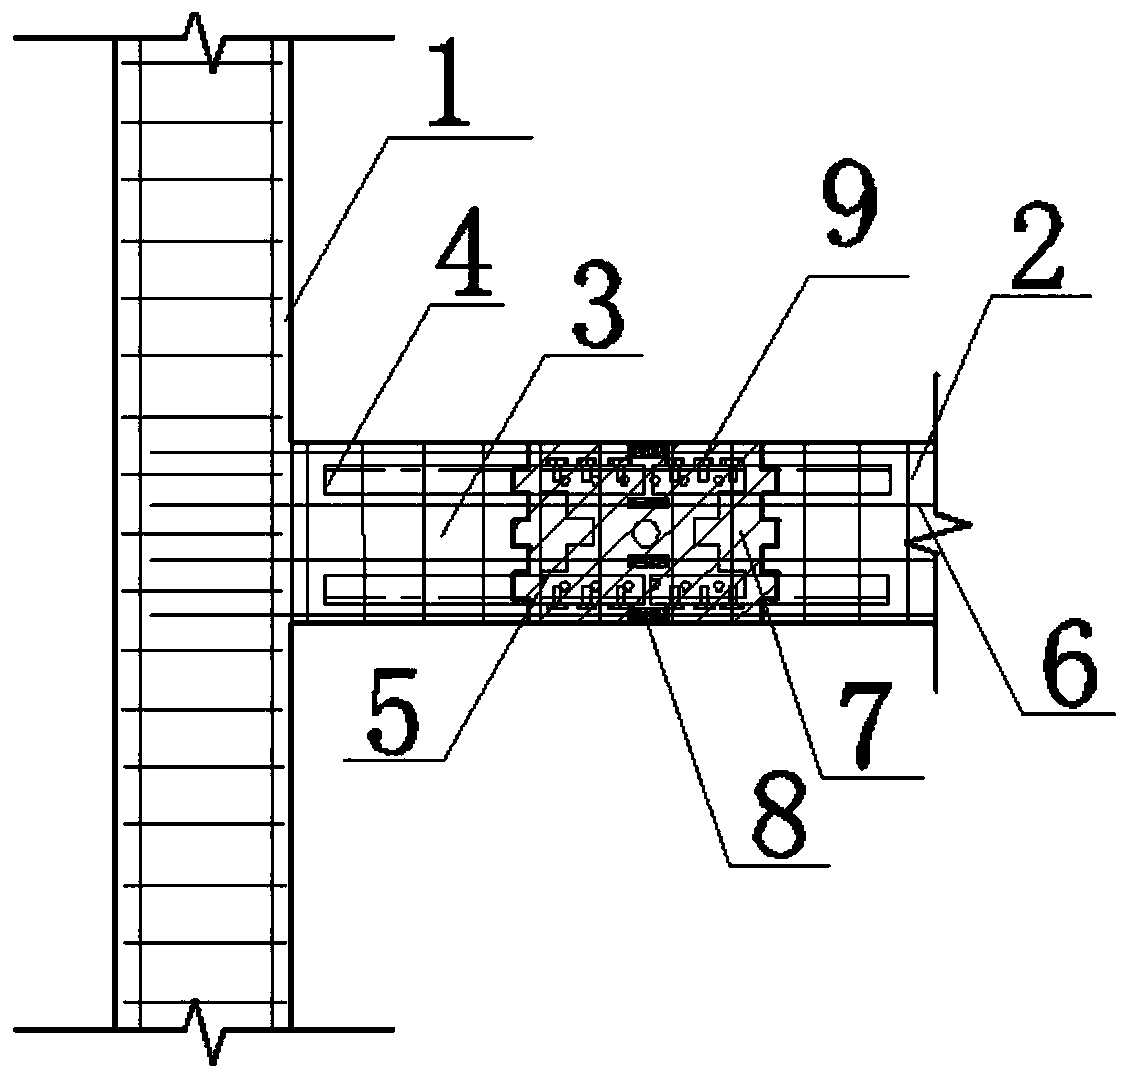 A prefabricated energy-dissipating beam node with built-in x-shaped low-yield point steel connectors